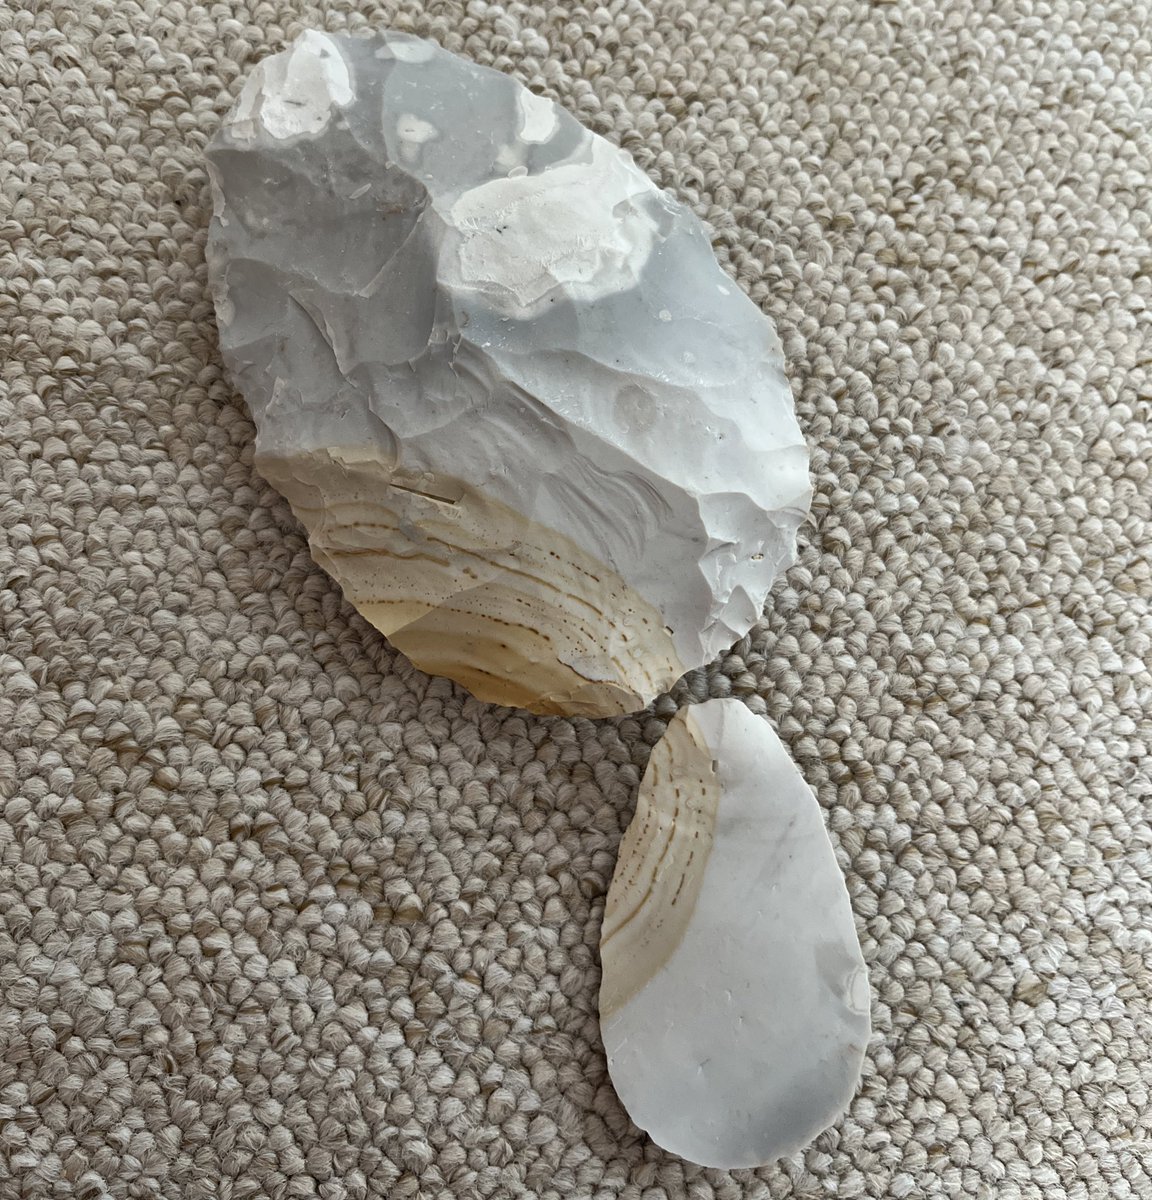 I bought this handaxe and scraper from @ancientcraftUK many moons ago, trying to cheer myself up mid-pandemic… and I’ve finally got them out to put on display! Aren’t they beautiful? The scraper flake came from the handaxe production. Look at the iron staining 😍 #FlintFriday